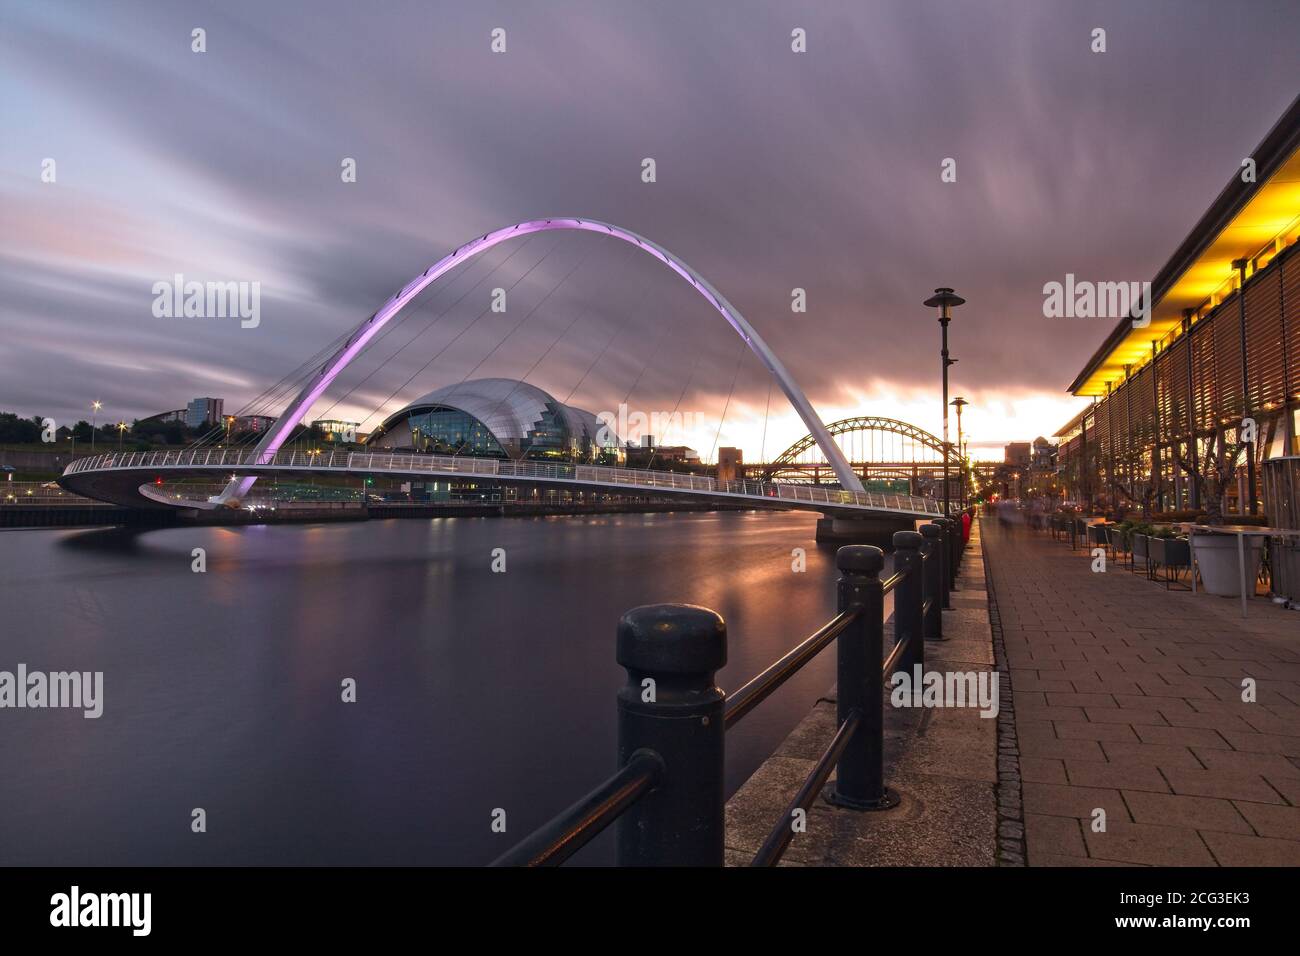 The Gateshead Millennium Bridge spanning the River Tyne captured at dusk from Newcastle quayside looking up the River Tyne. Stock Photo